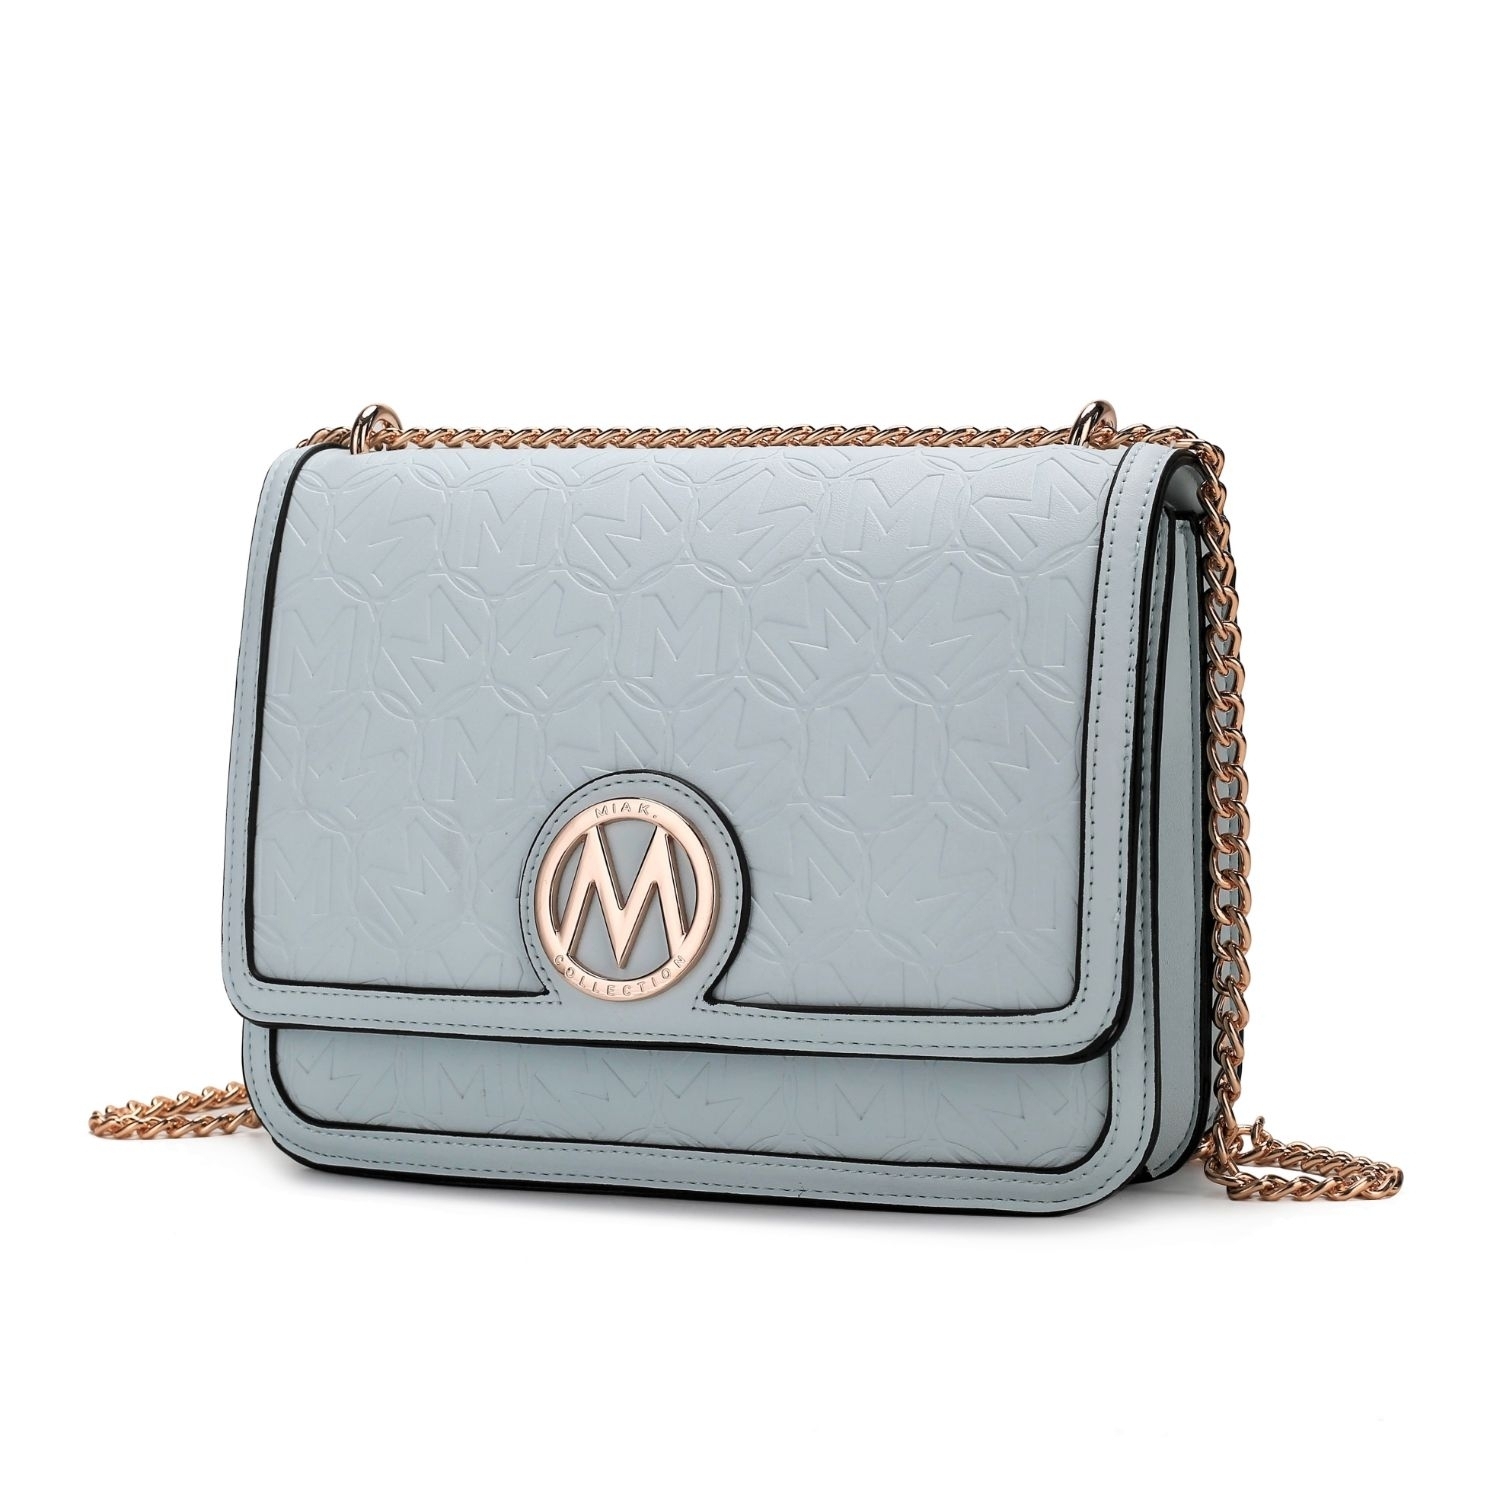 MKF Collection Amiyah Vegan Leather Women's Shoulder Bag By Mia K - Light Blue